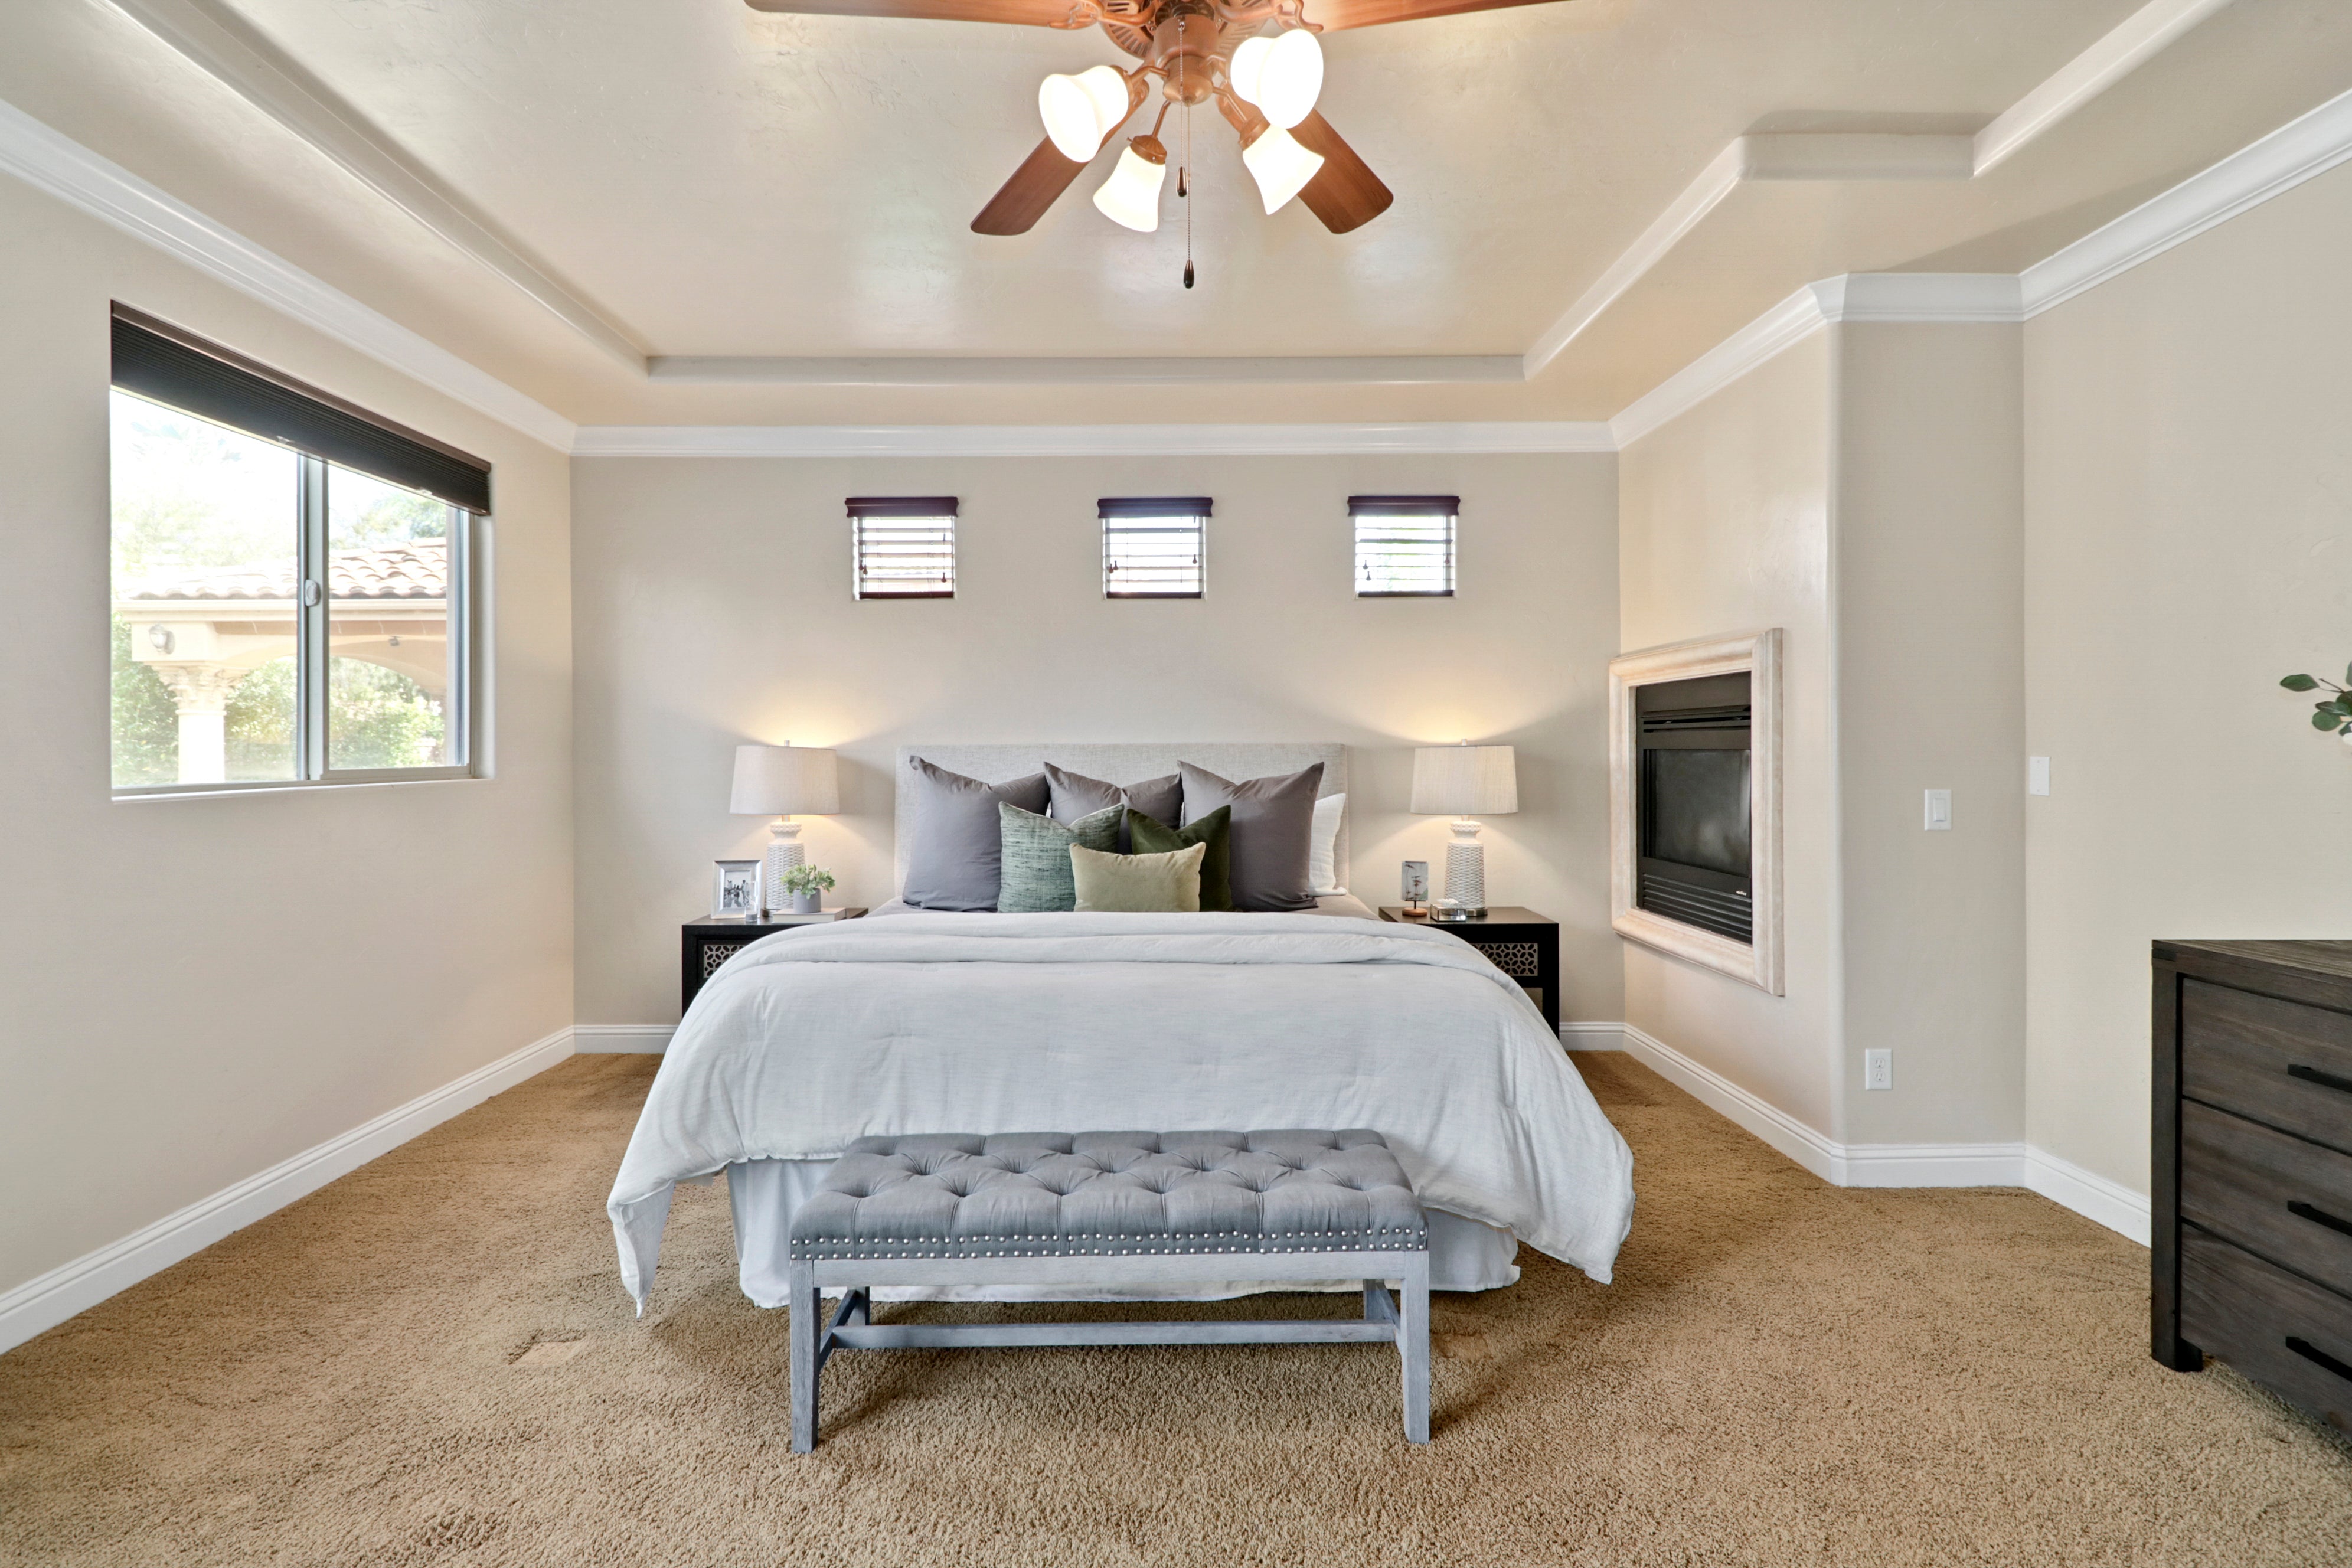 Premiere Home Staging Projects | Master bedroom interior design idea - Waterstone Dr, Roseville